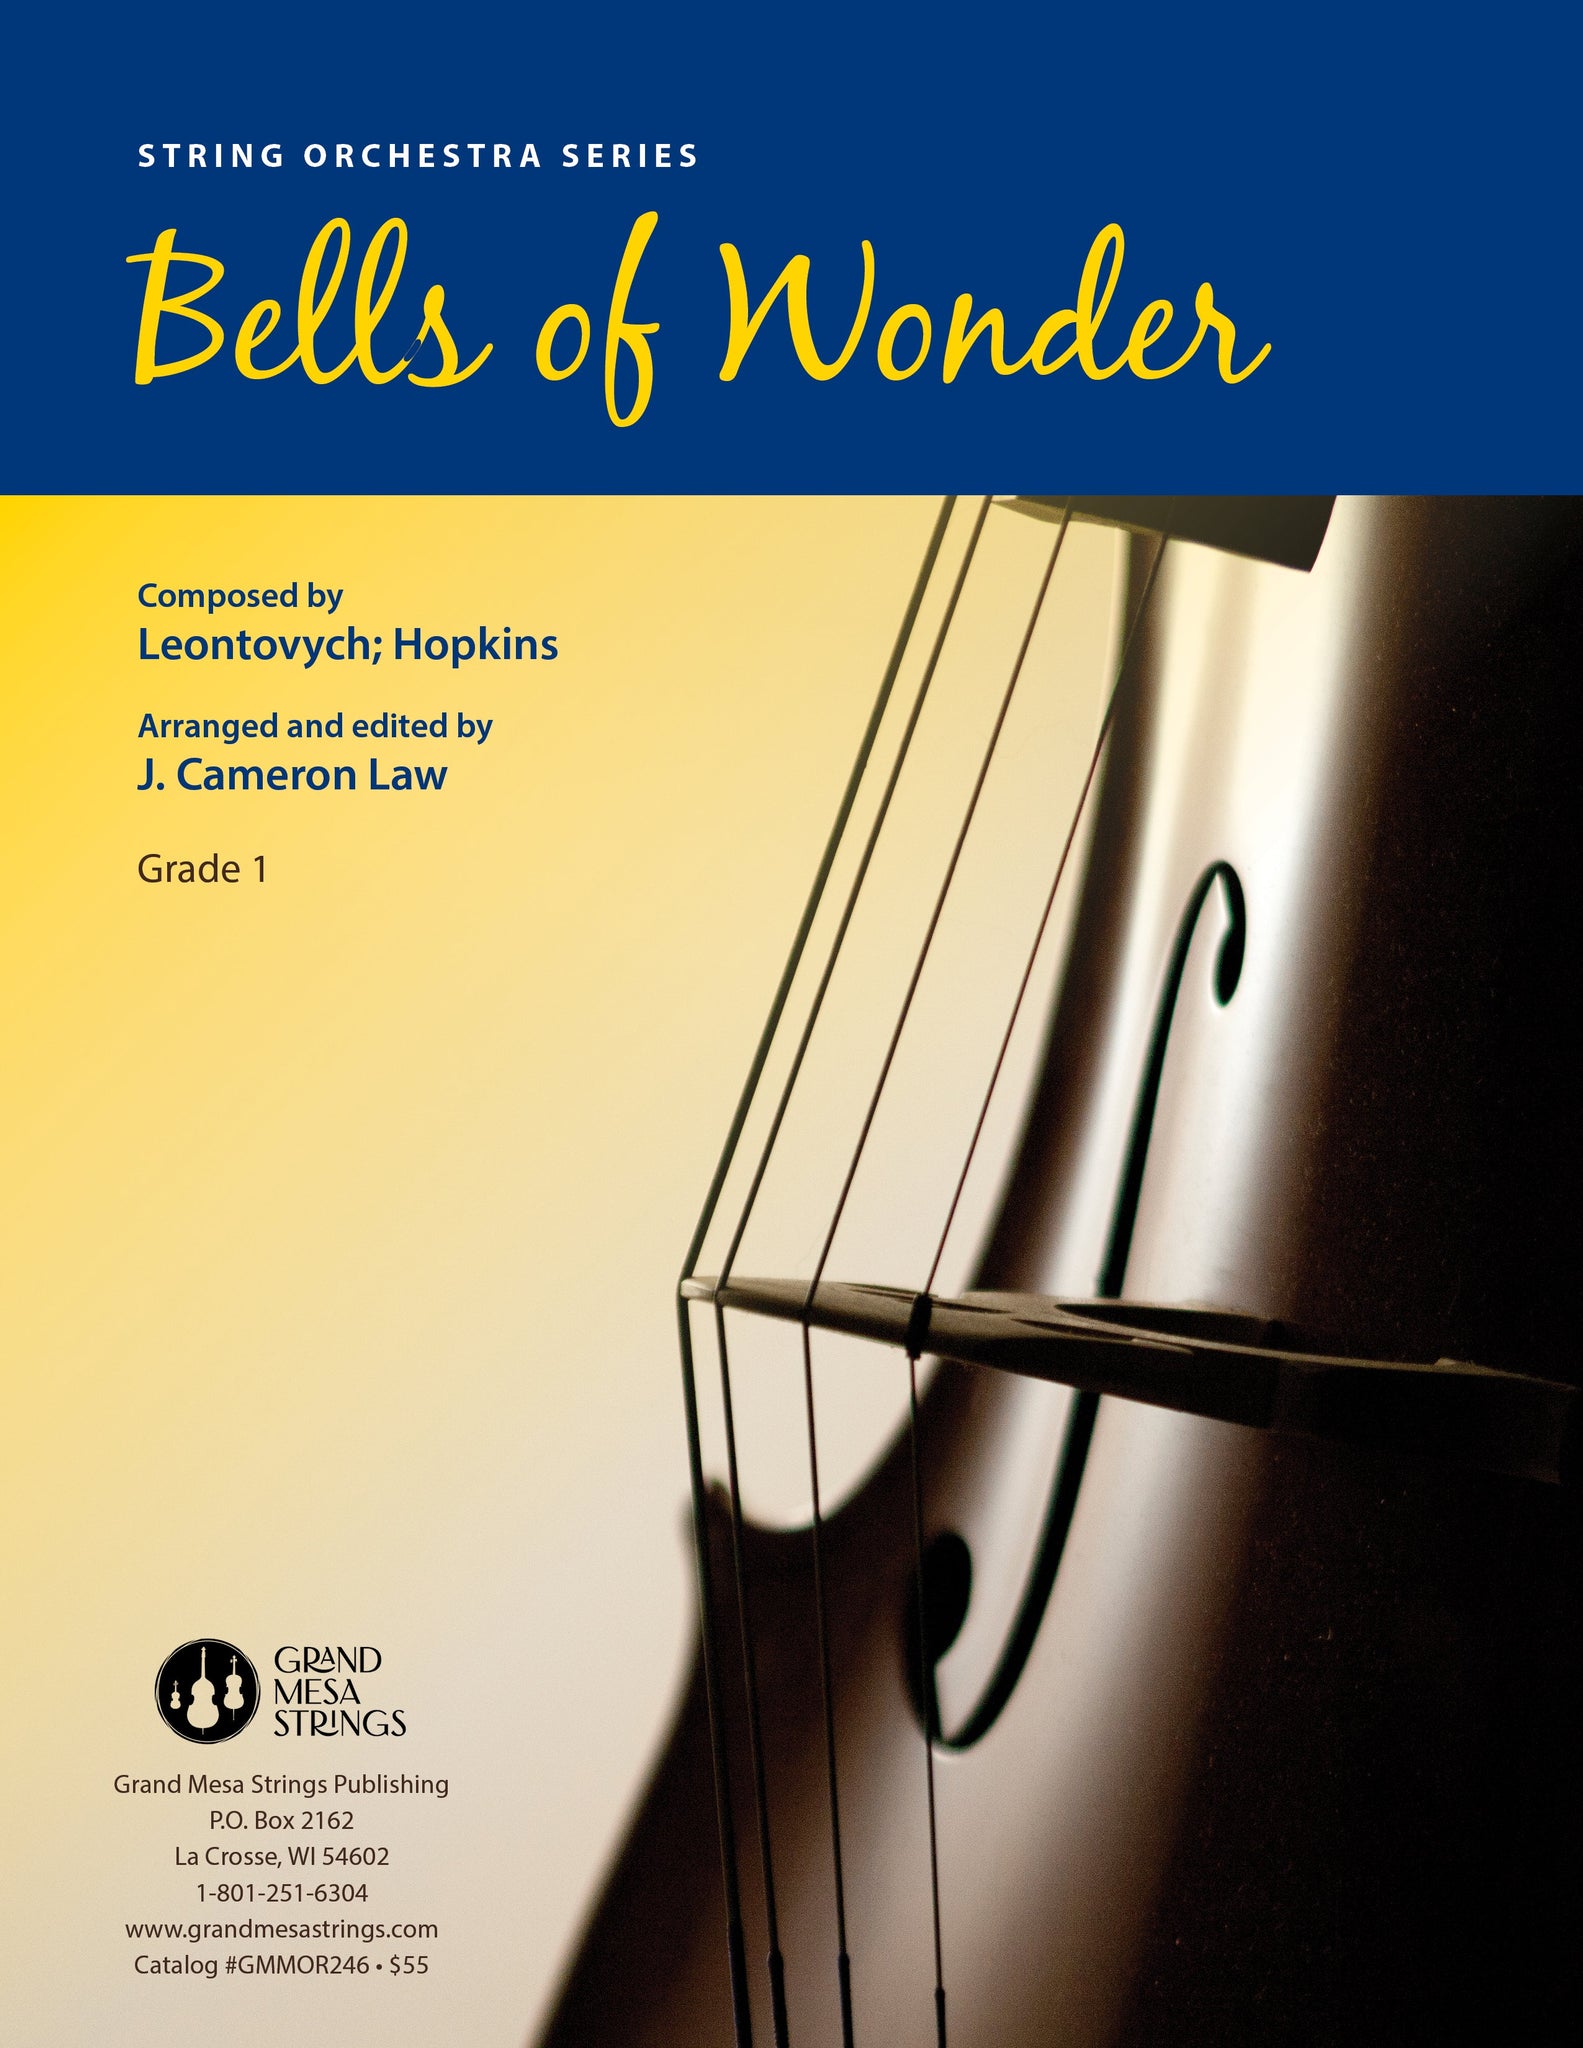 Strings sheet music cover of Bells of Wonder, Composed by John Henry Hopkins, arranged by J. Cameron Law.